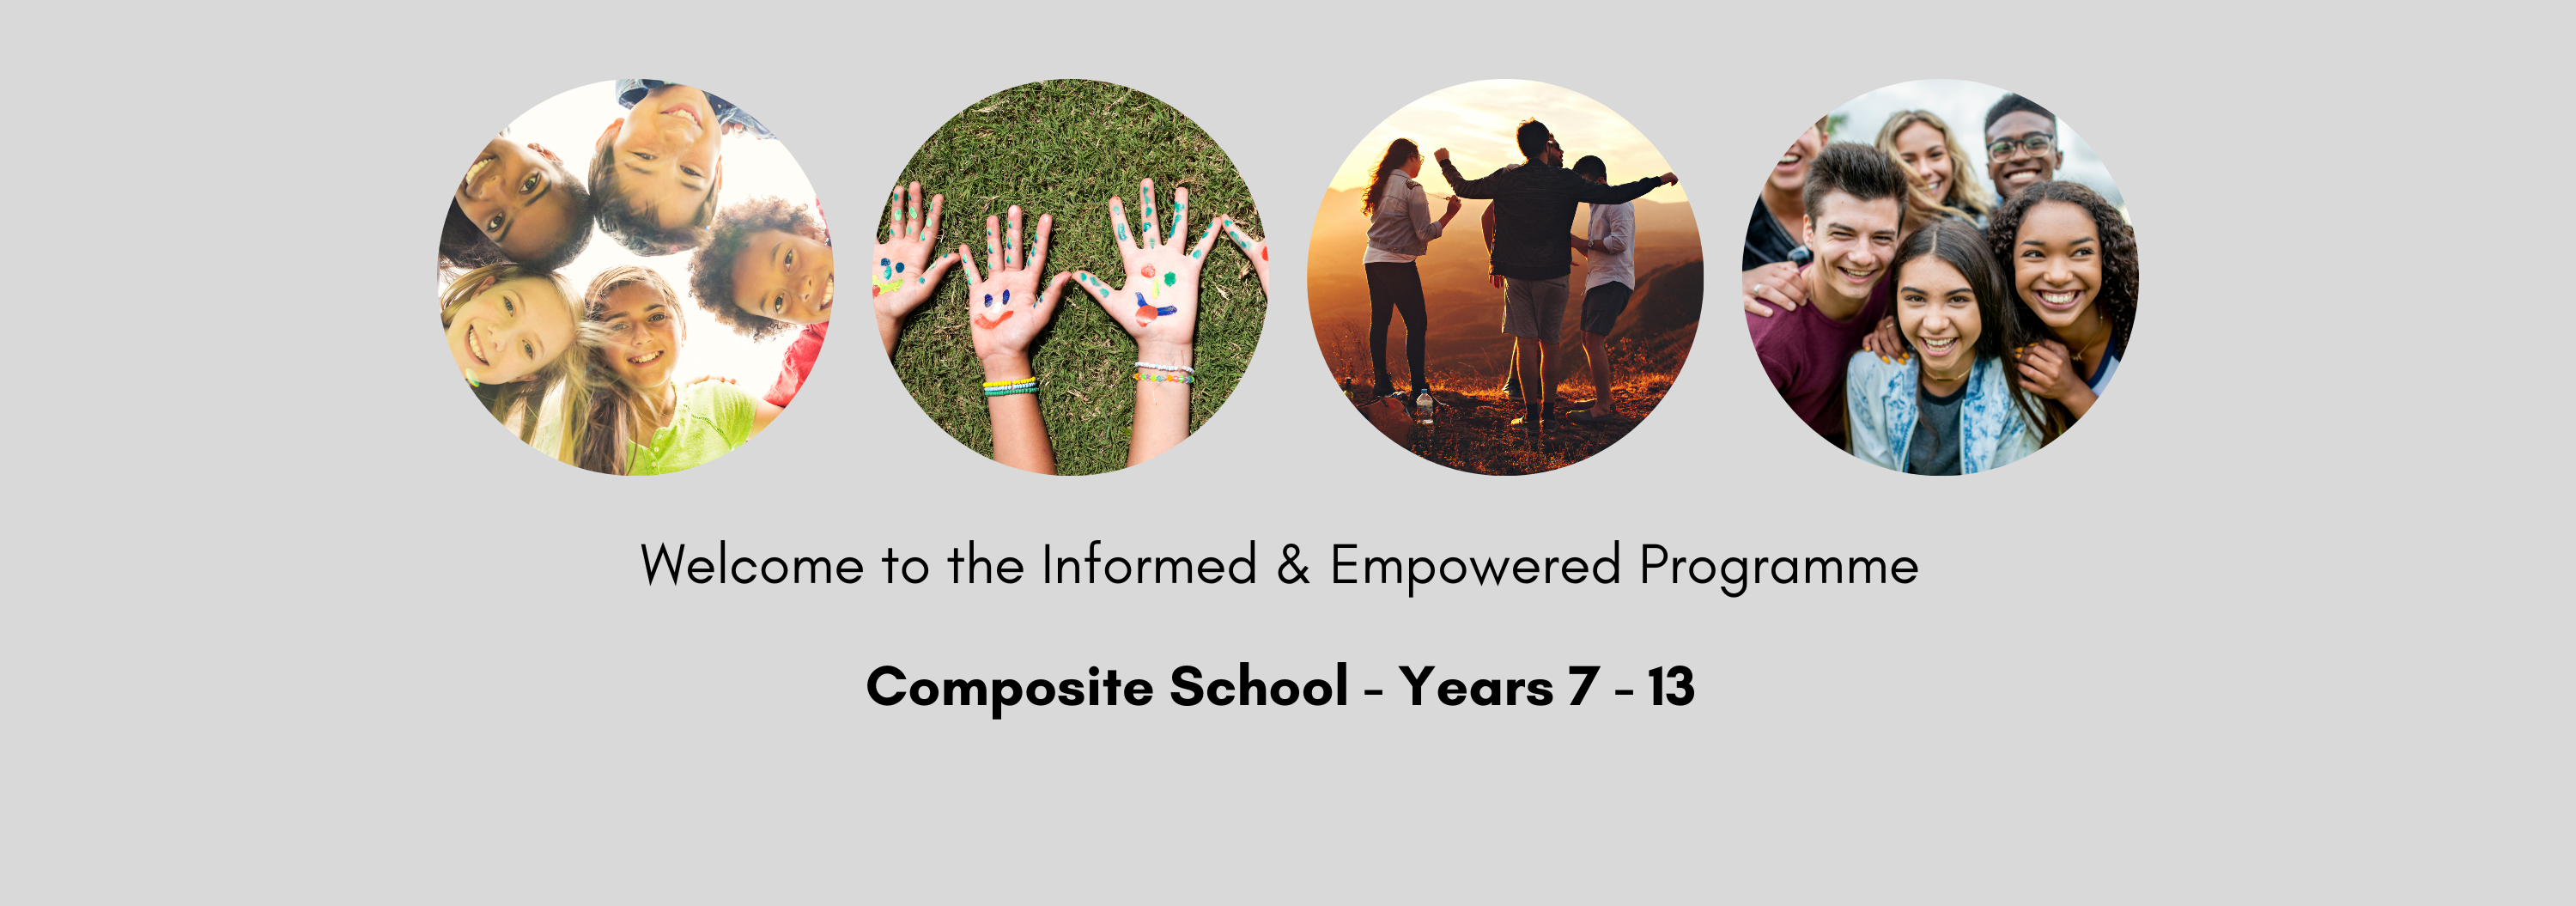 Our Kids Online Informed & Empowered Programme